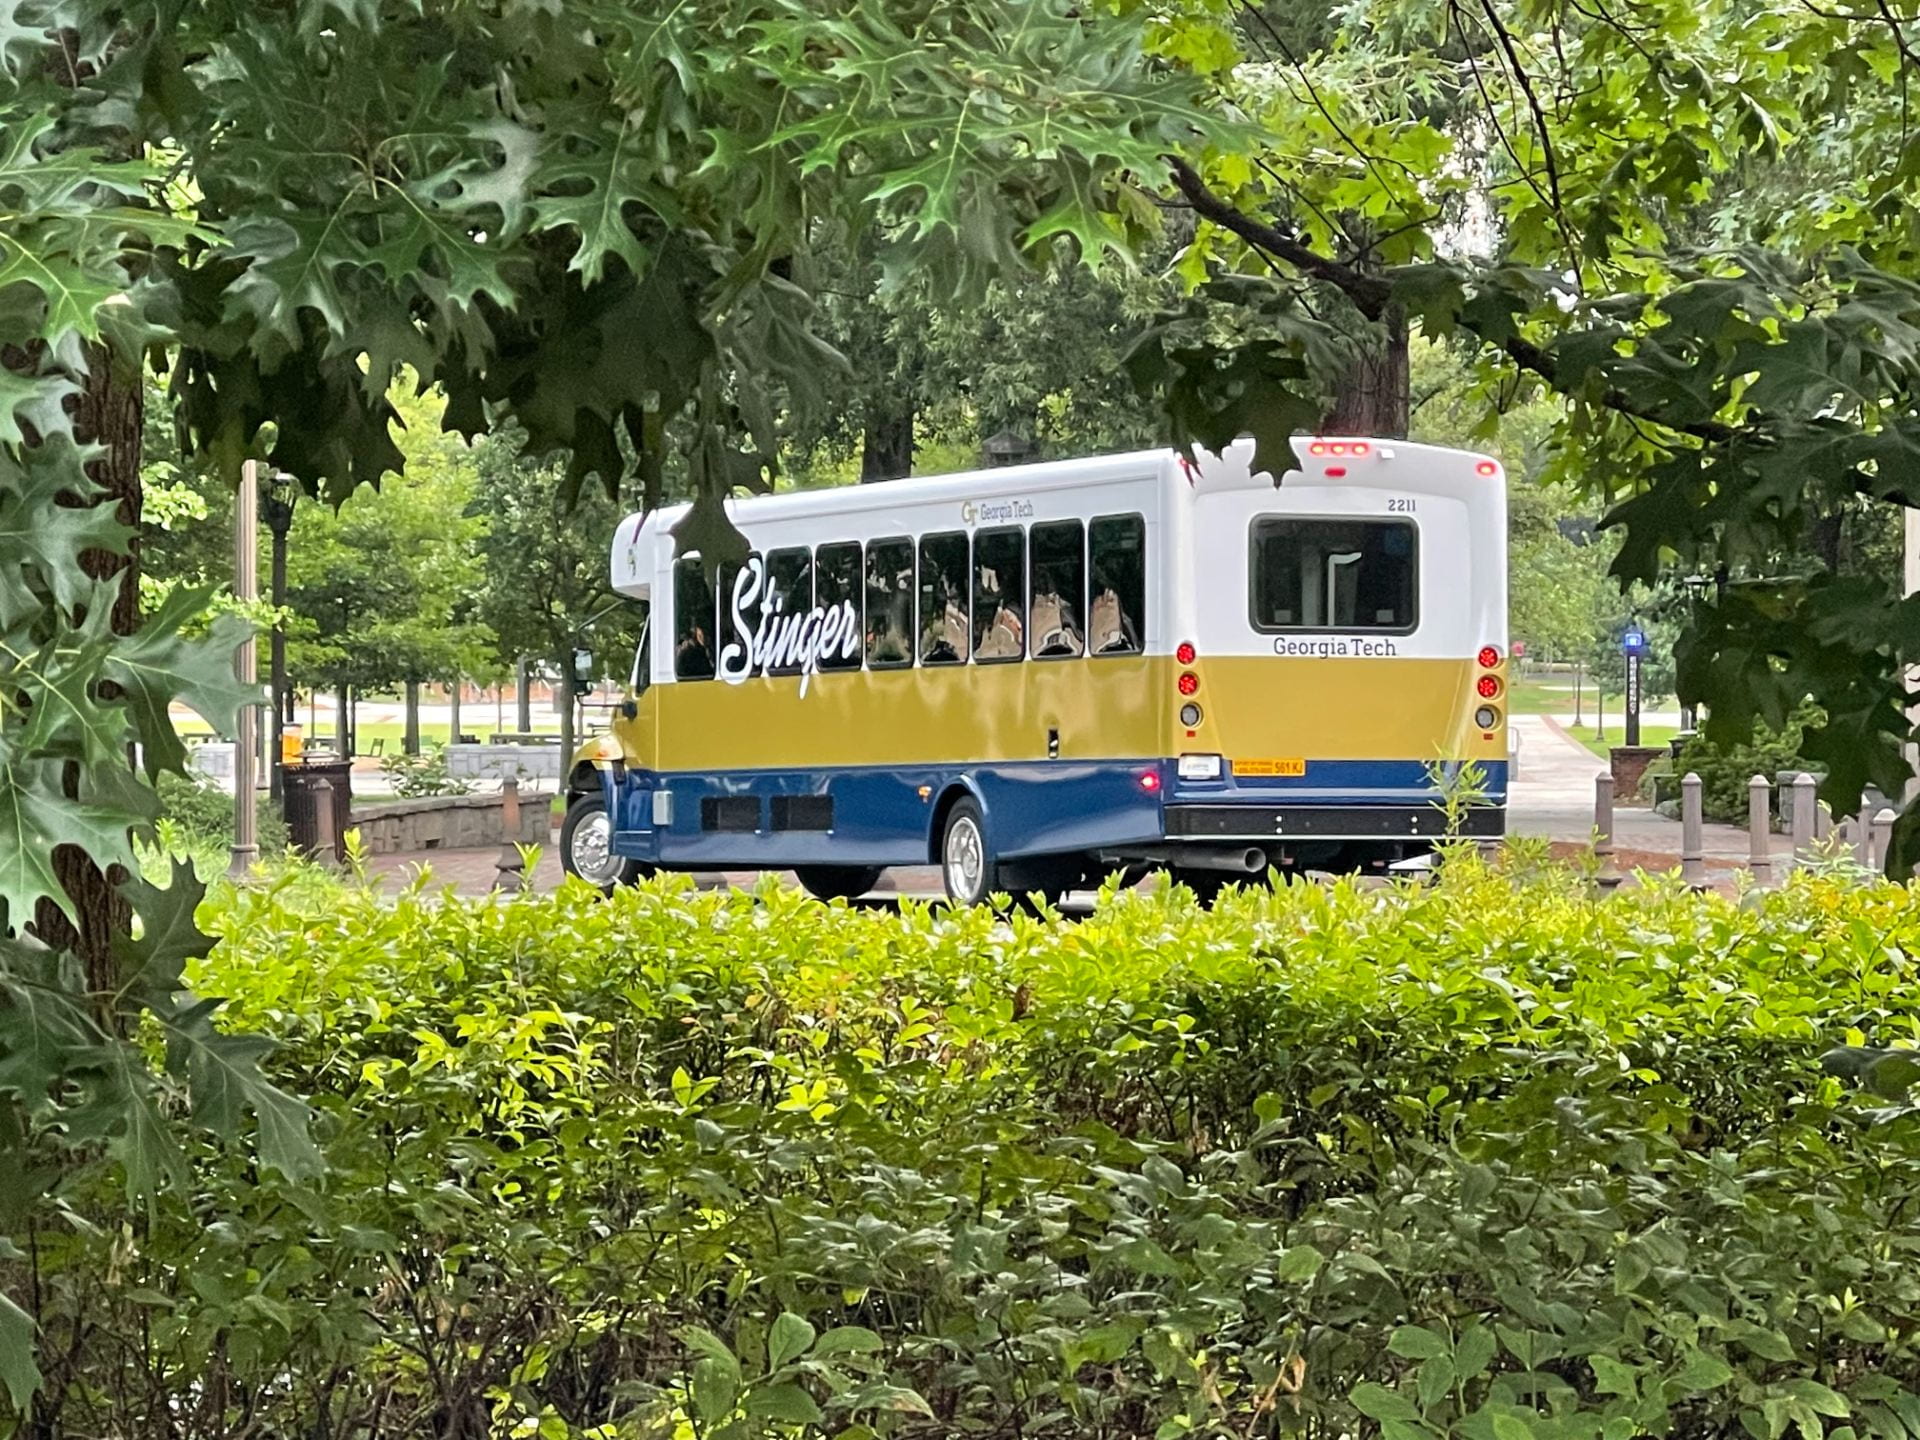 Stinger Bus Viewed Through the Trees